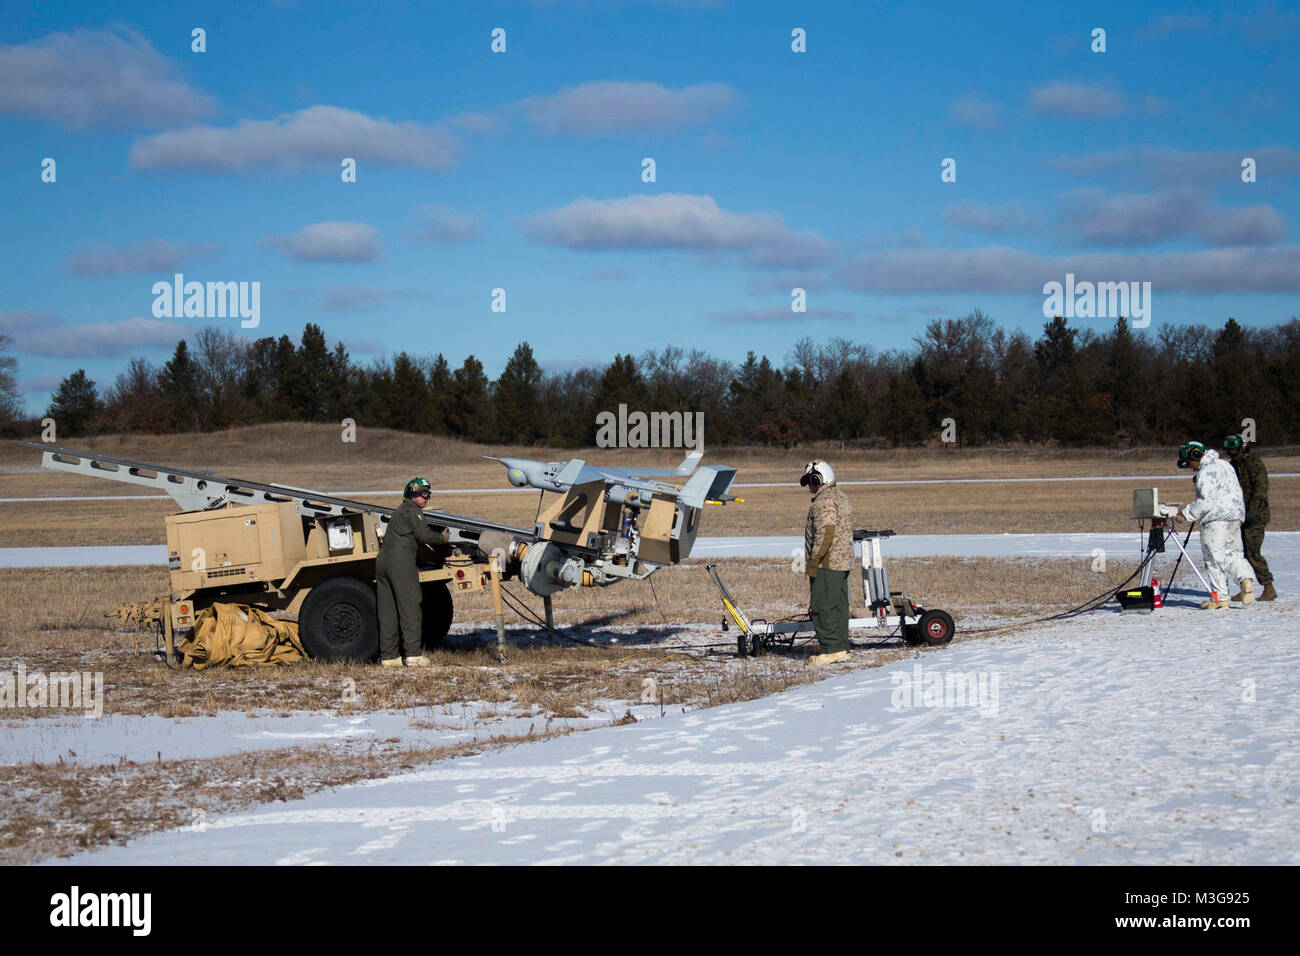 U.S. Marines with Marine Unmanned Aerial Vehicle Squadron (VMU) 2 prepare to launch an RQ-21A Blackjack during Frozen Badger on Fort McCoy, Wis., Jan. 29, 2018. Frozen Badger is a training exercise designed to improve VMU-2's operational capabilities in extreme cold weather environments. (U.S. Marine Corps Stock Photo